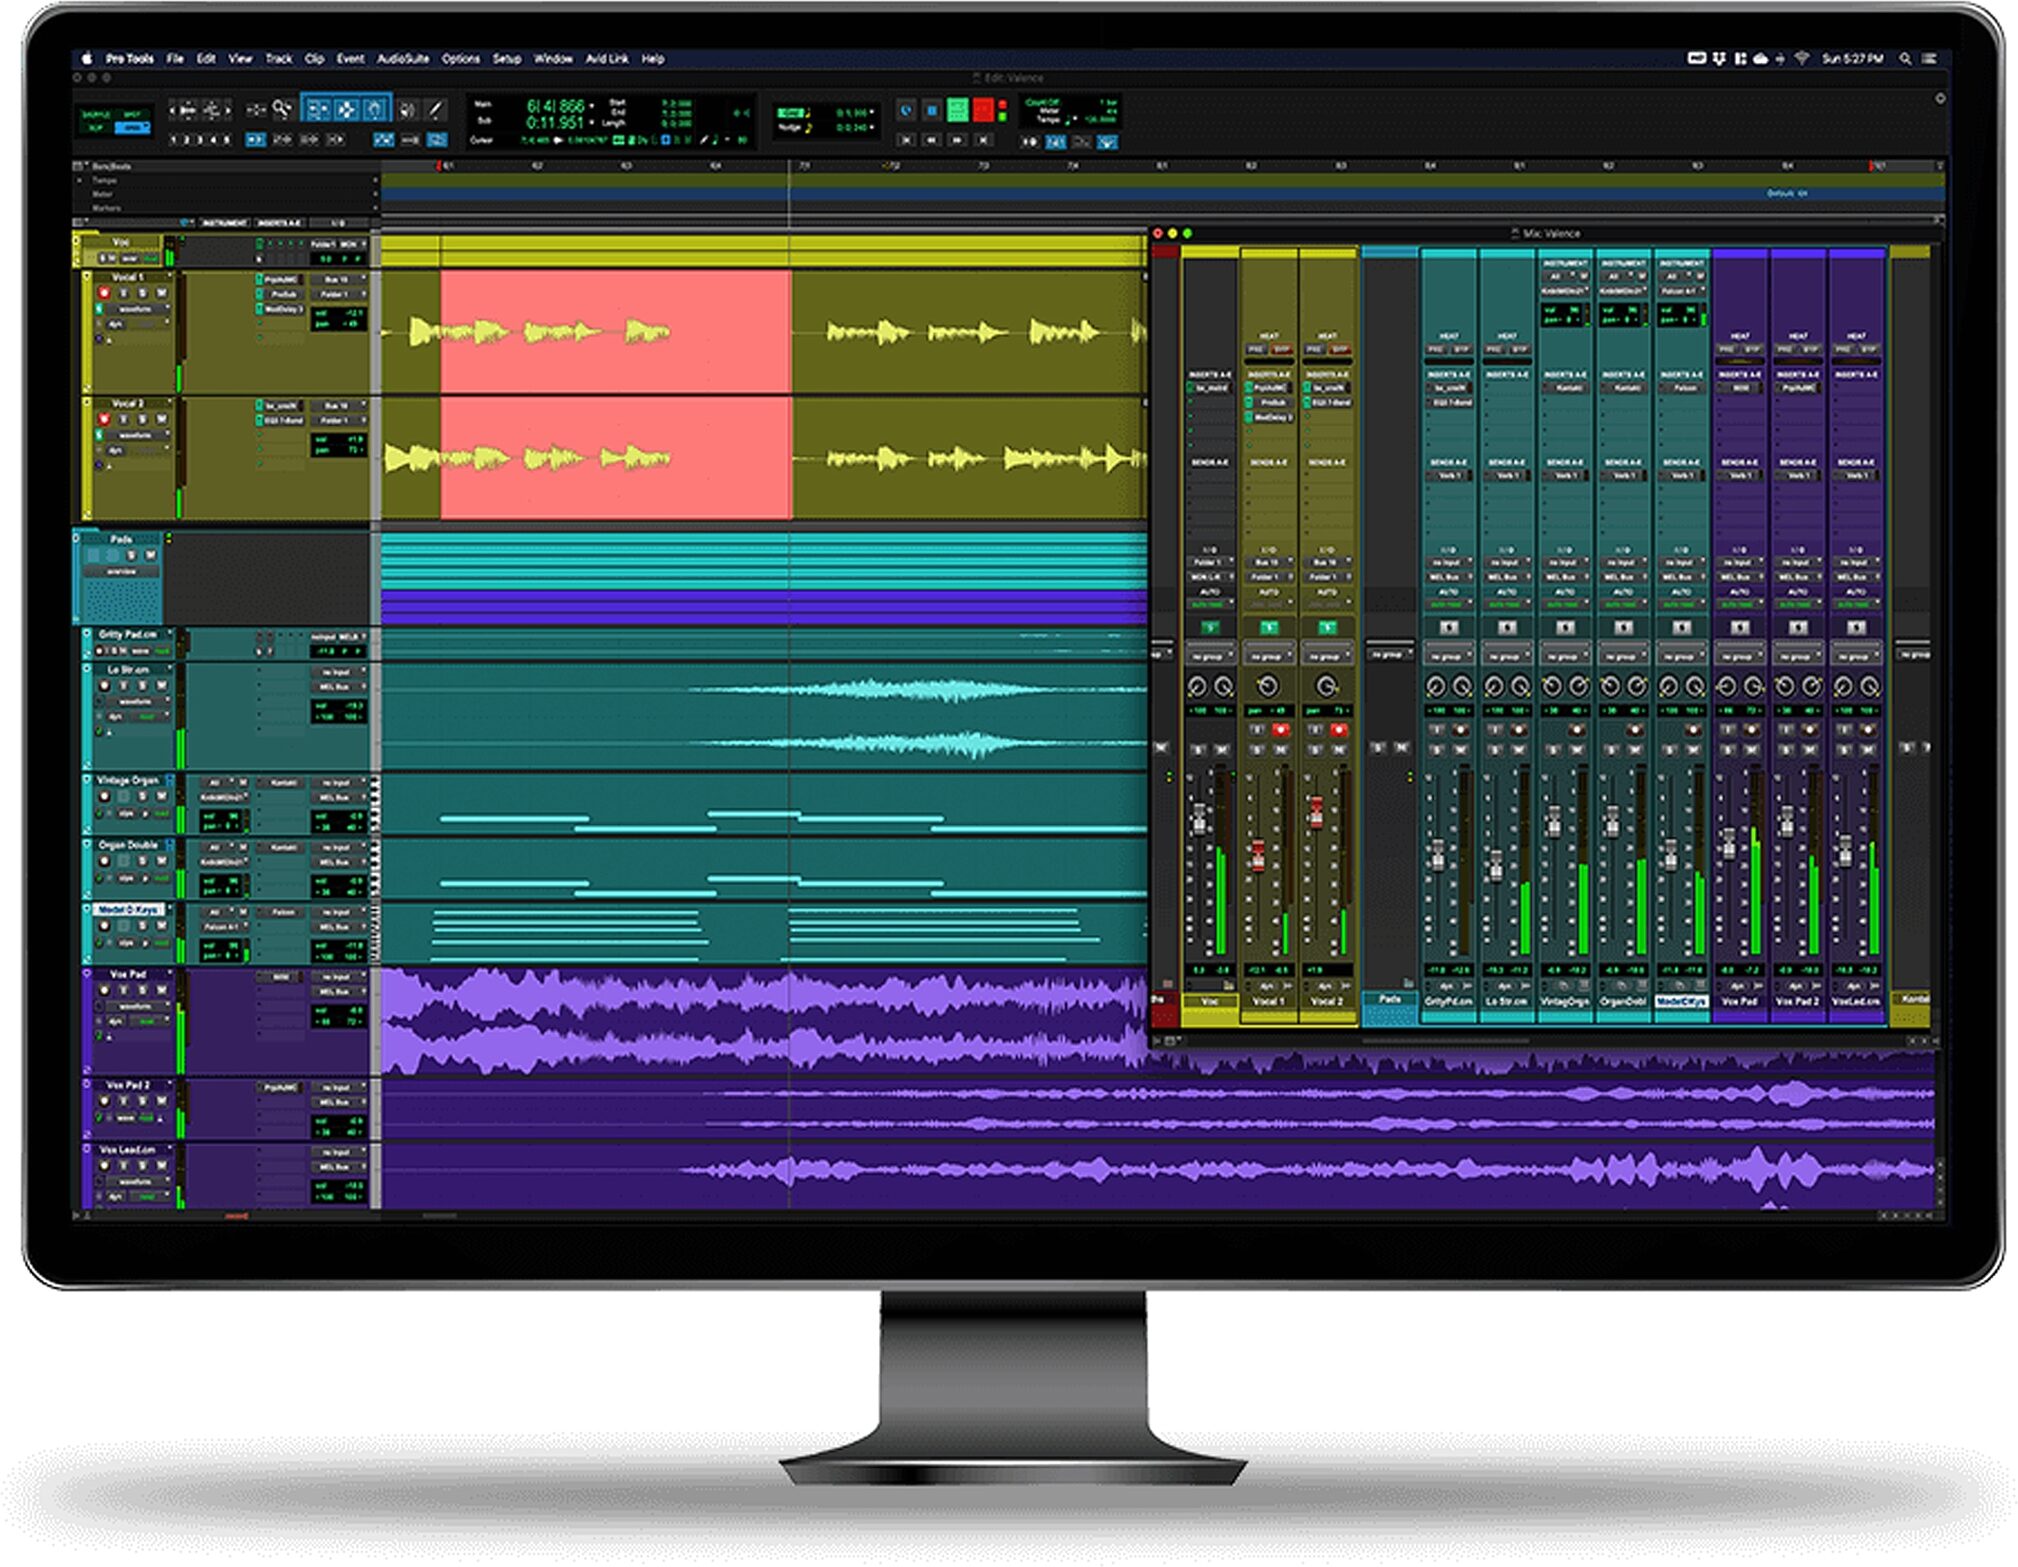 Avid Pro Tools 2018 Professional with Upgrade Plan